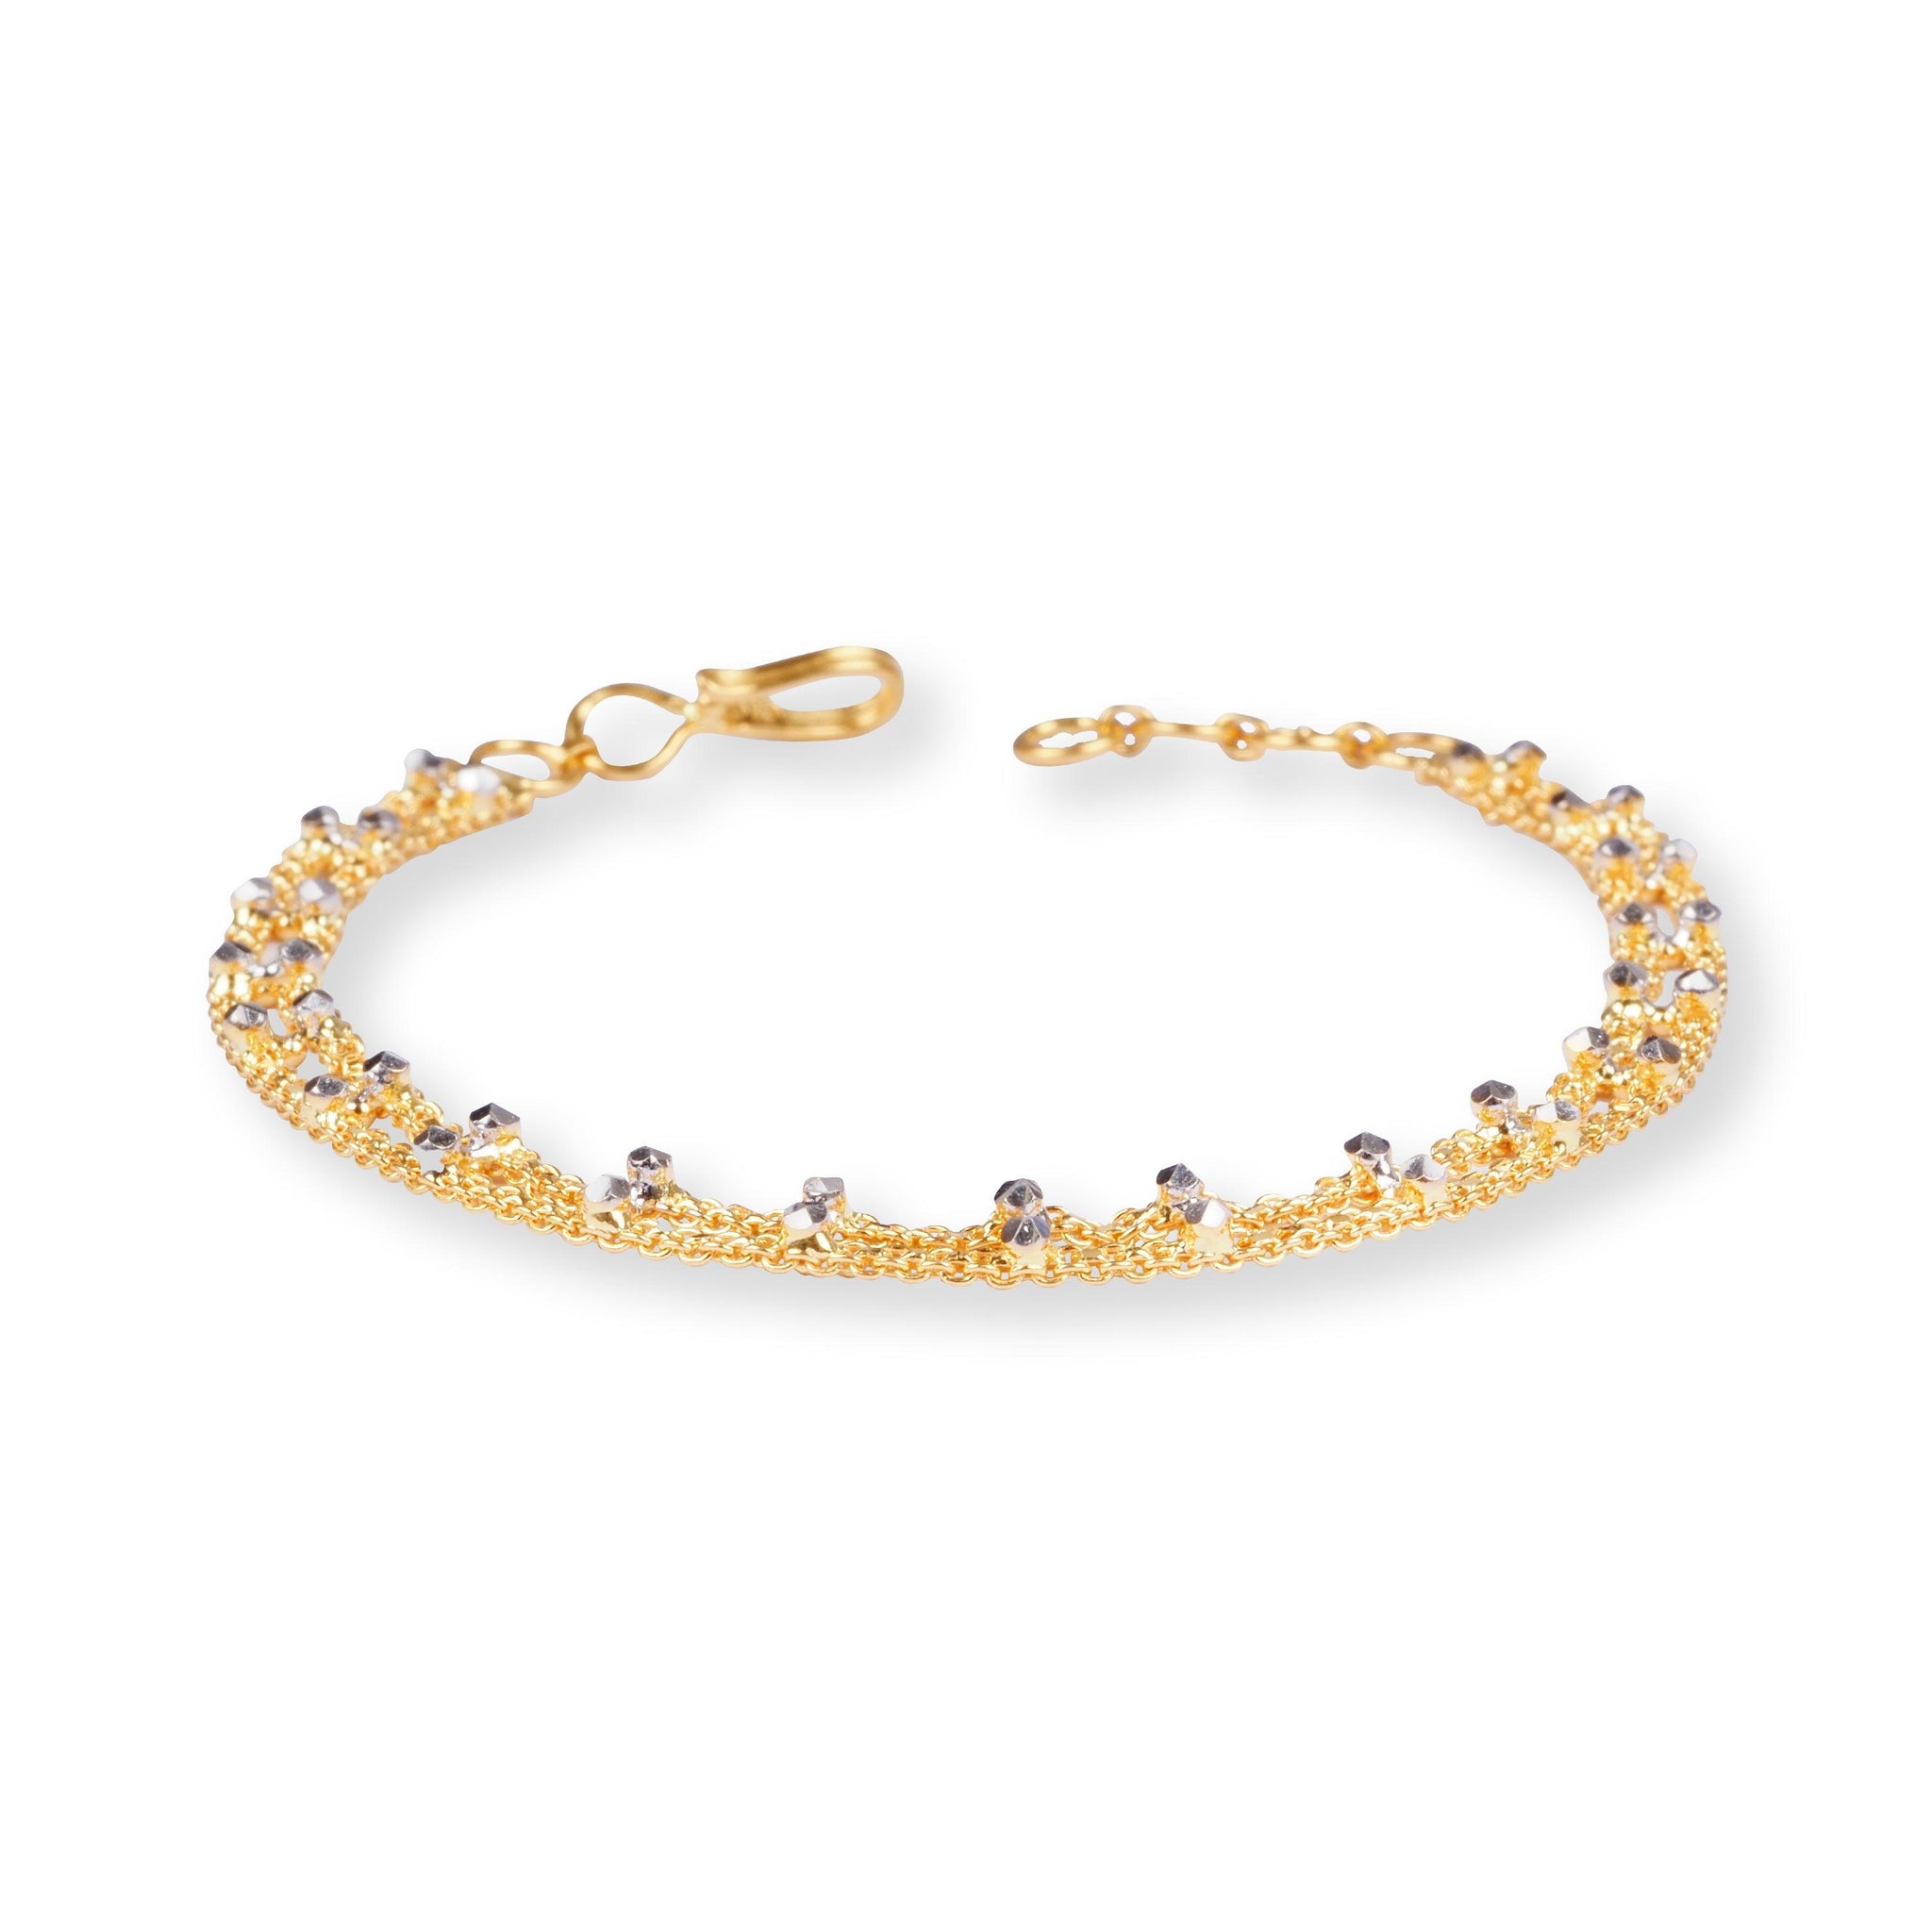 22ct Gold Two Row Bracelet with Diamond Cut Beads and Hook Clasp LBR-8496